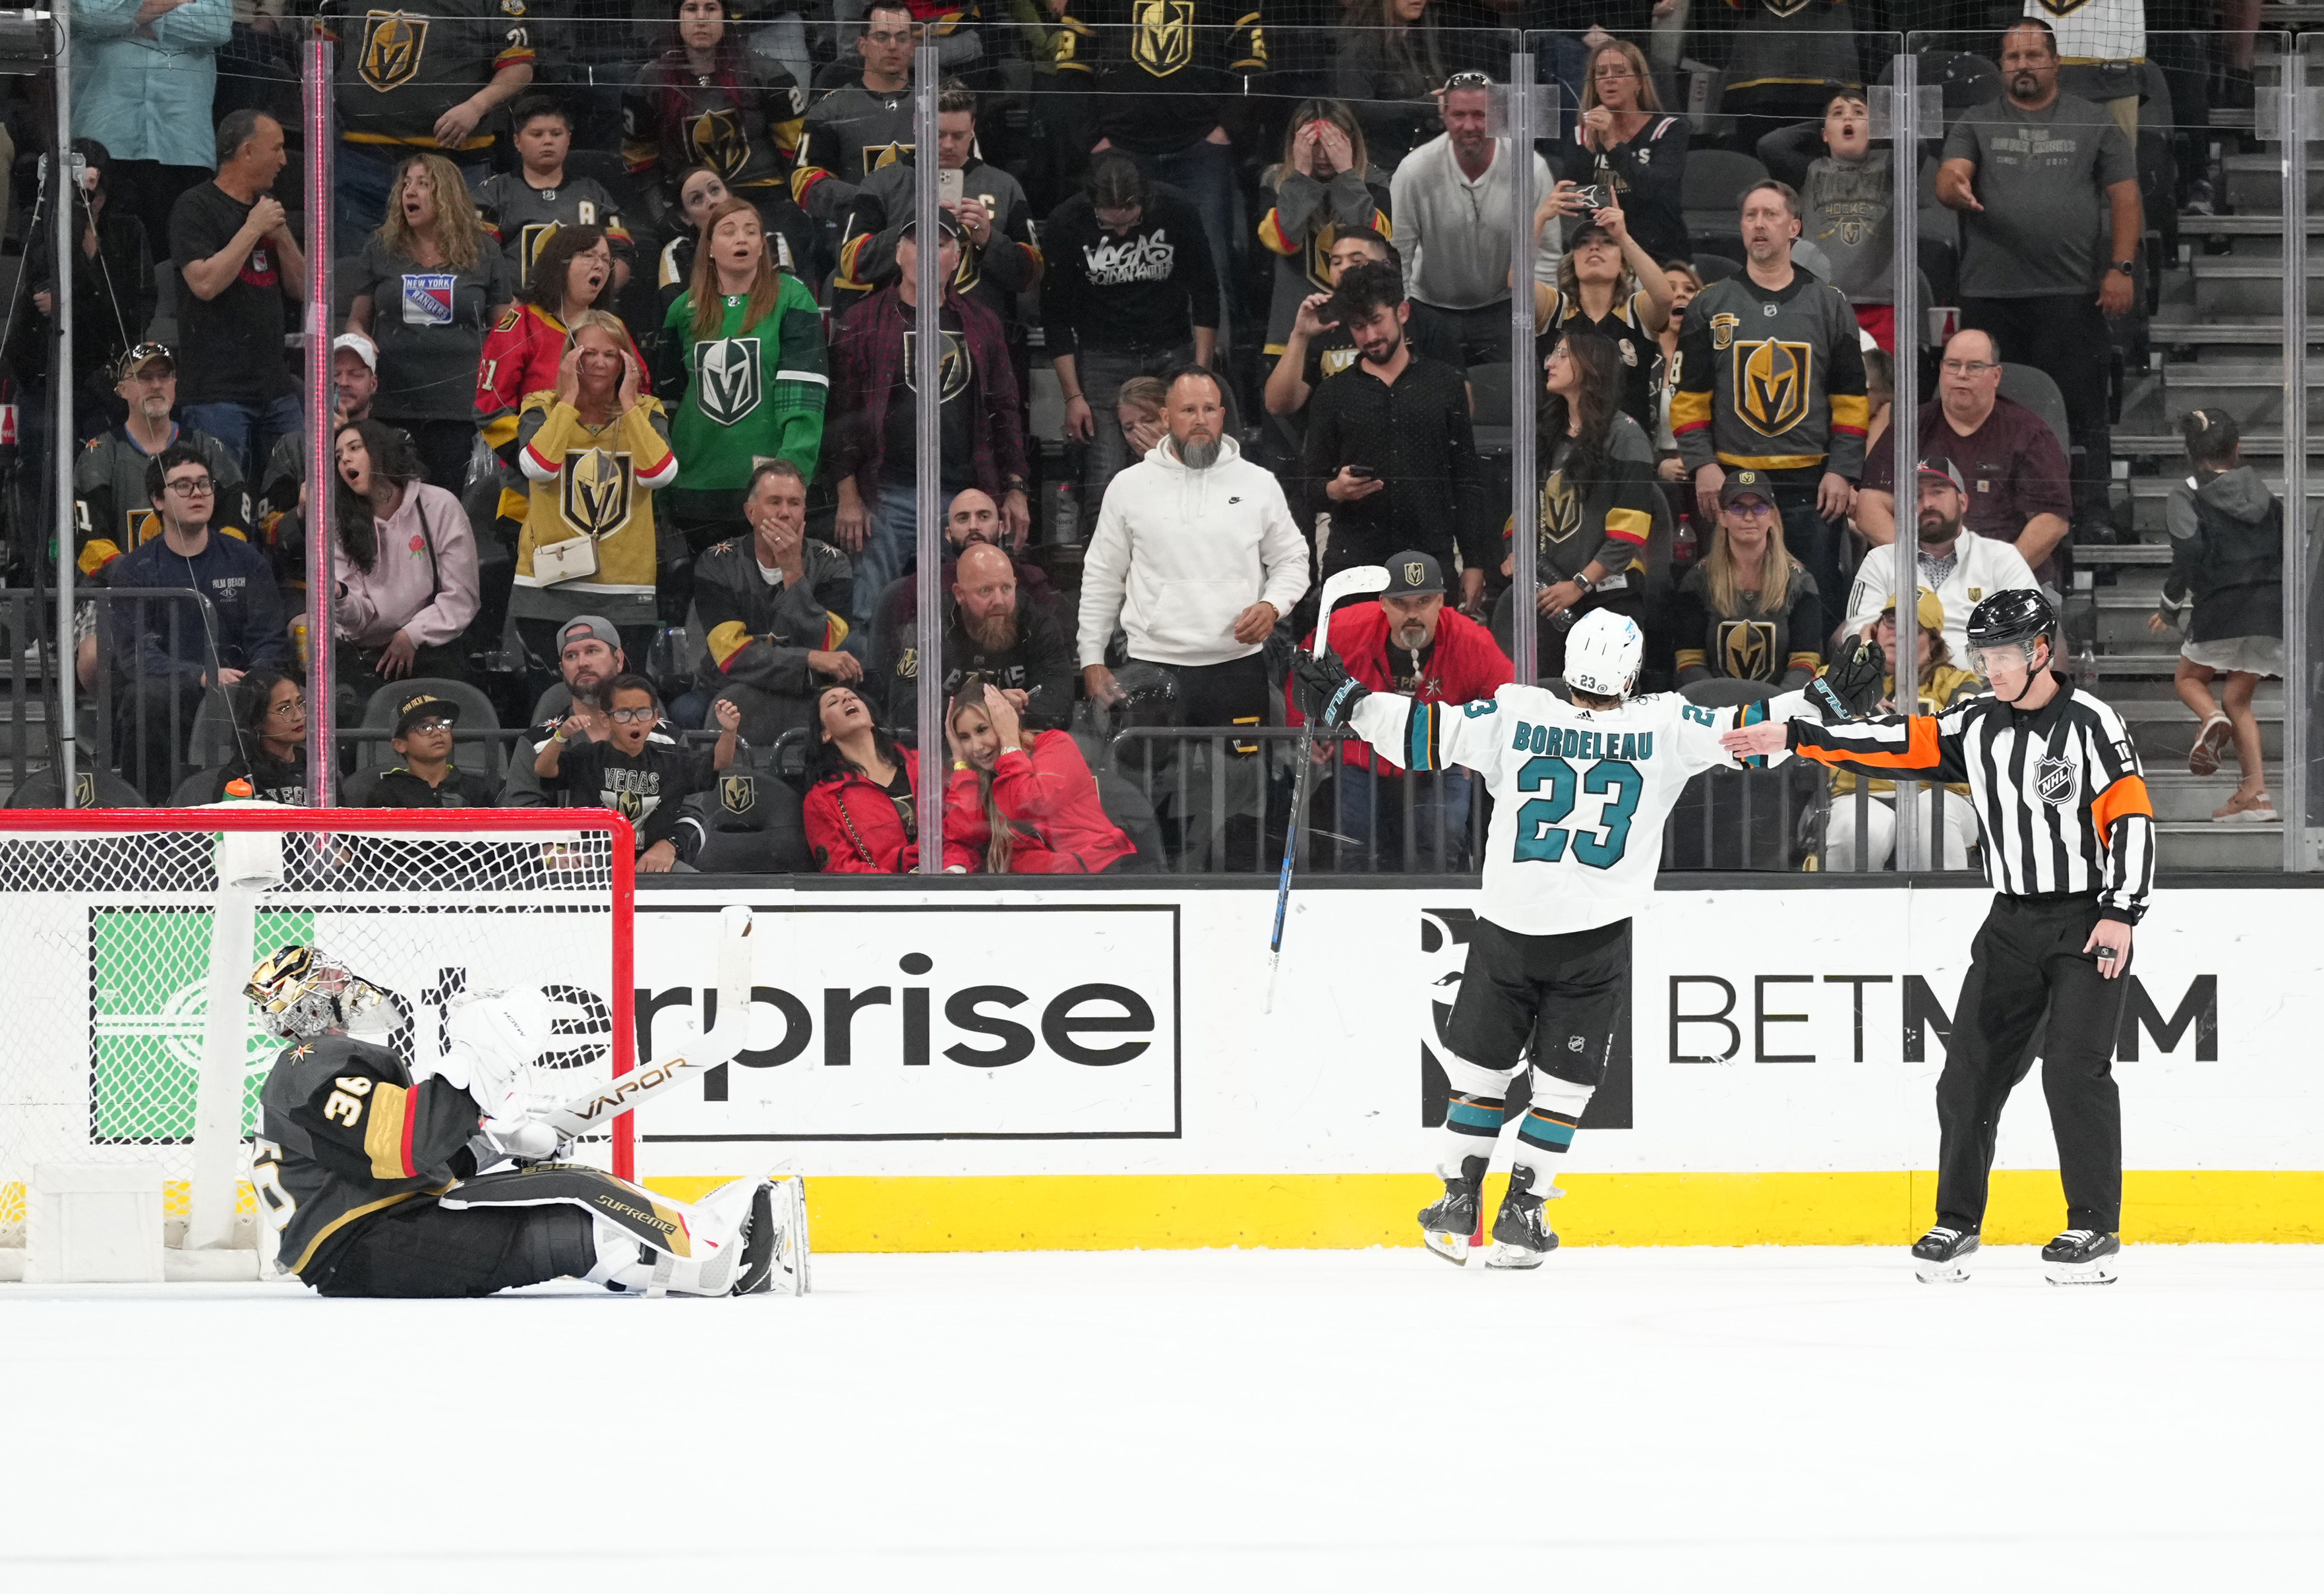 Thomas Bordeleau #23 of the San Jose Sharks celebrates with teammates after scoring the game-winning goal in a shootout against the Vegas Golden Knights at T-Mobile Arena on April 24, 2022 in Las Vegas, Nevada.